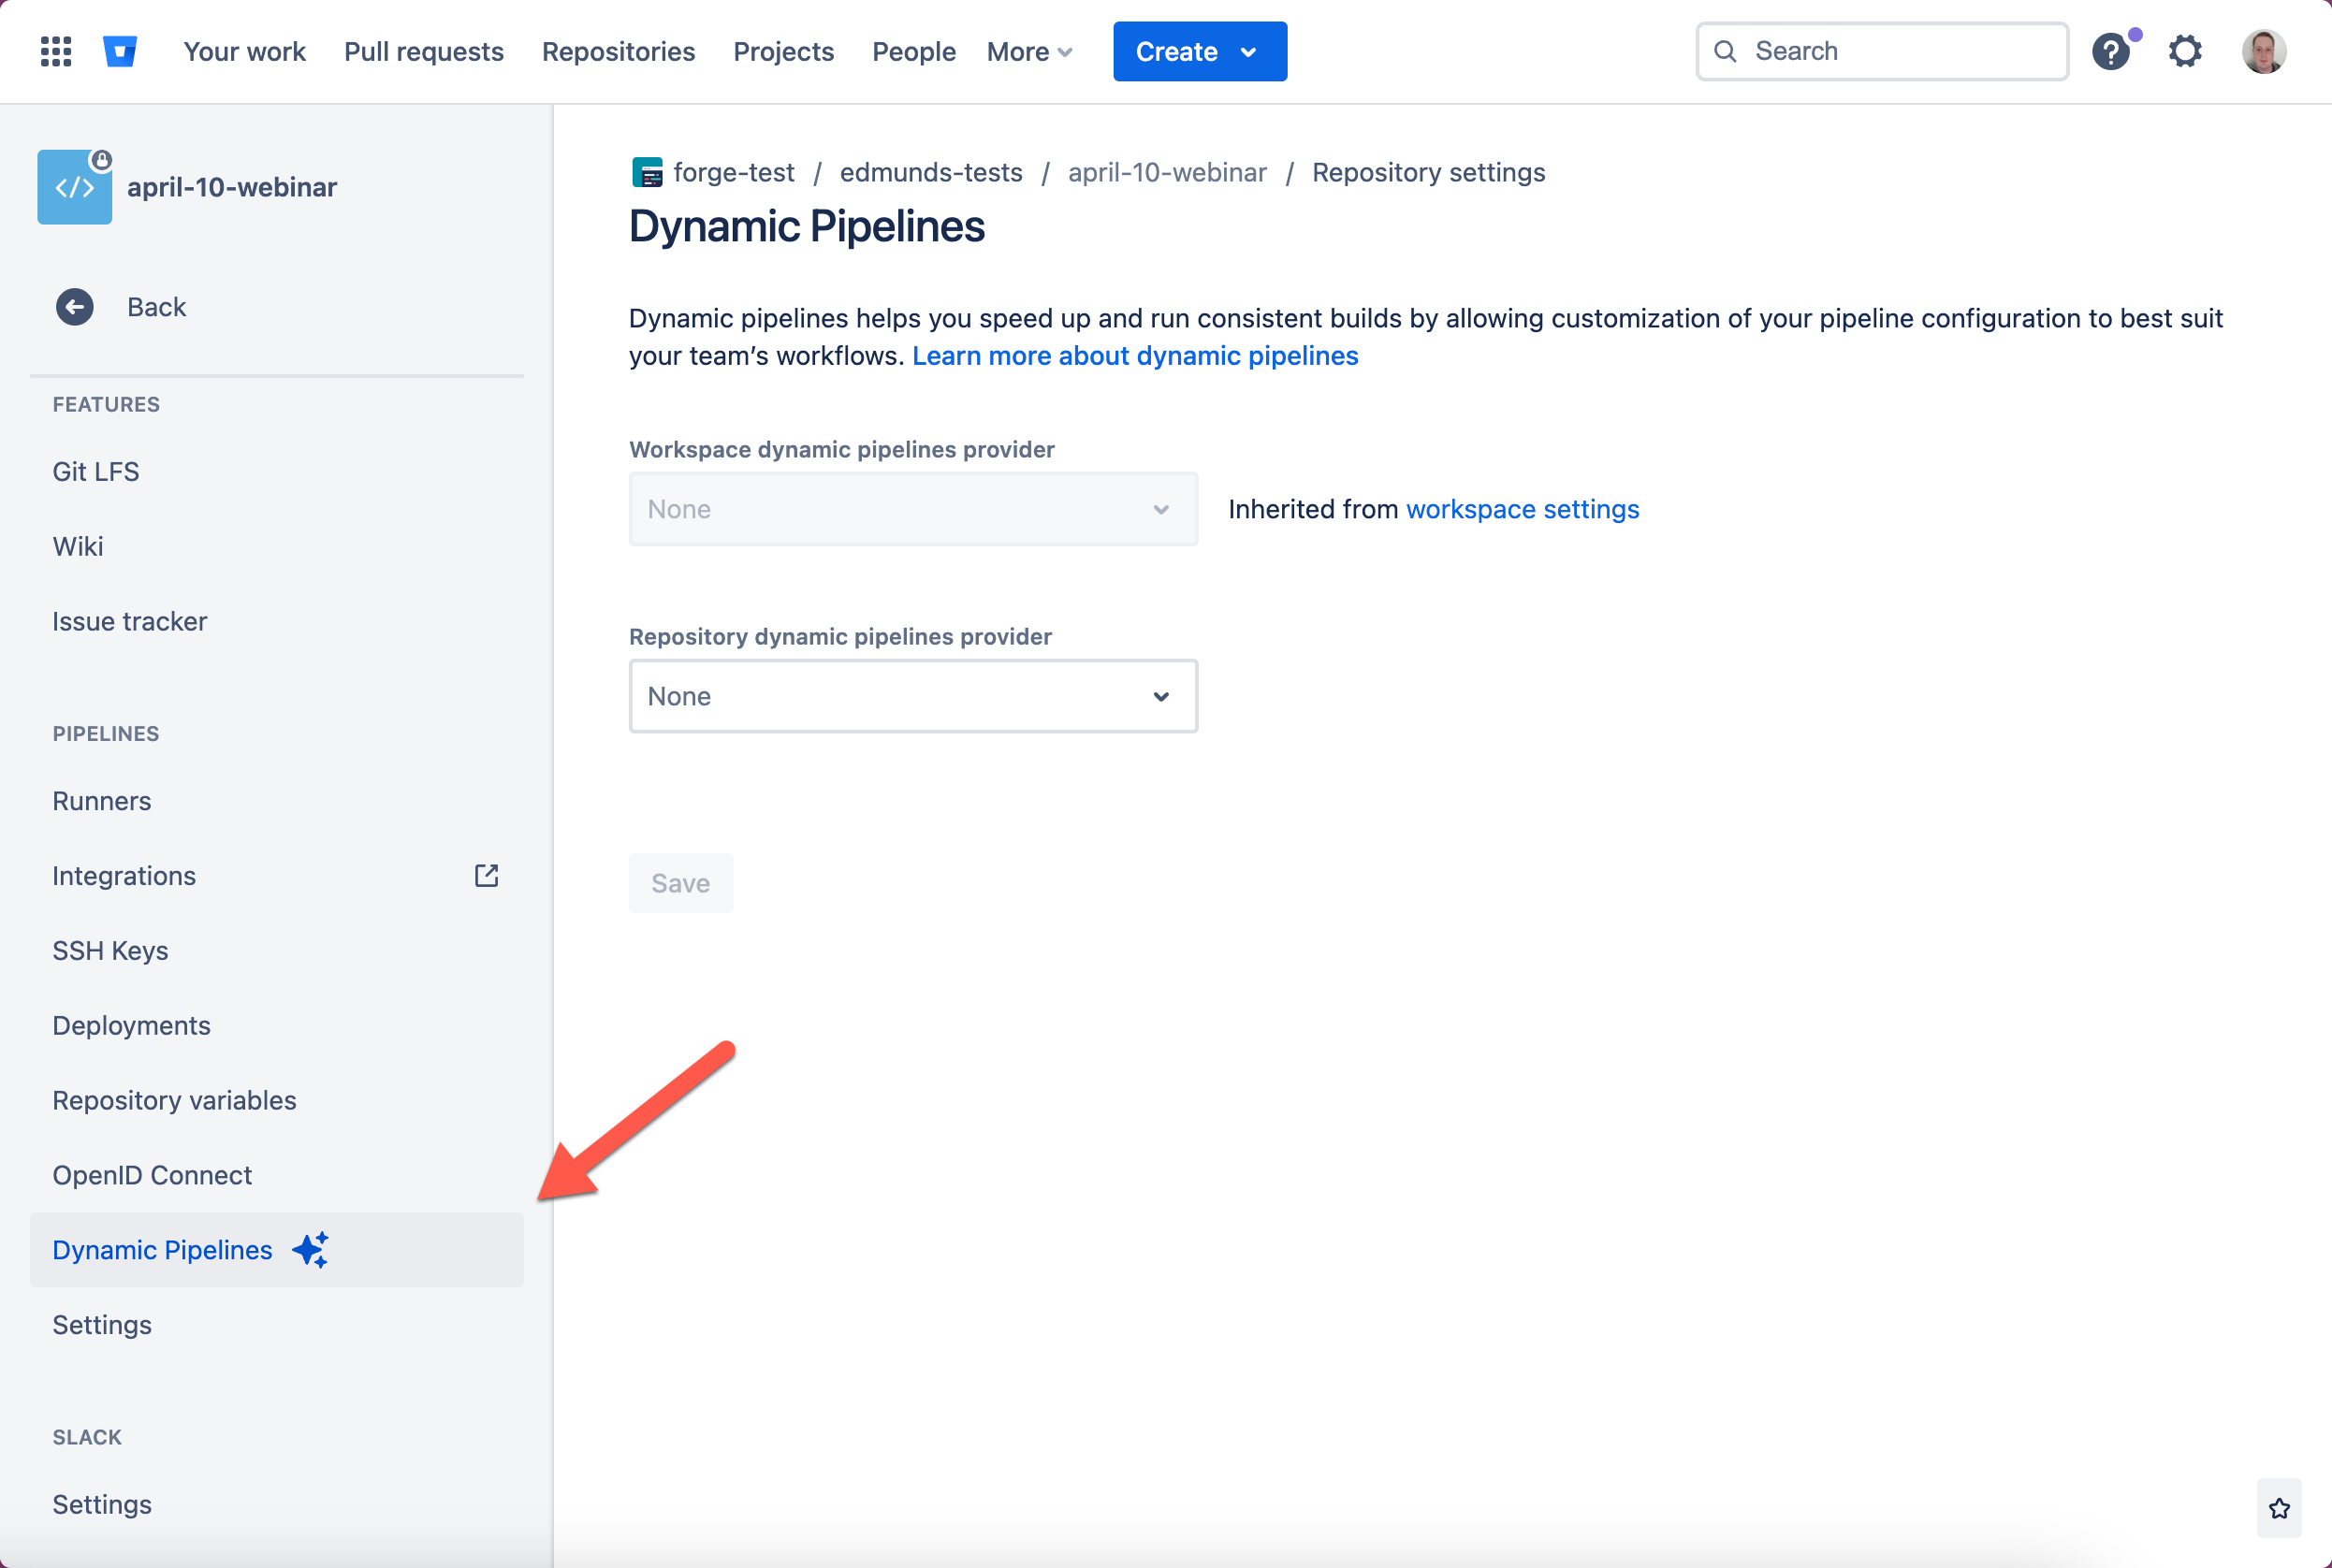 Dynamic Pipelines page in the repository settings